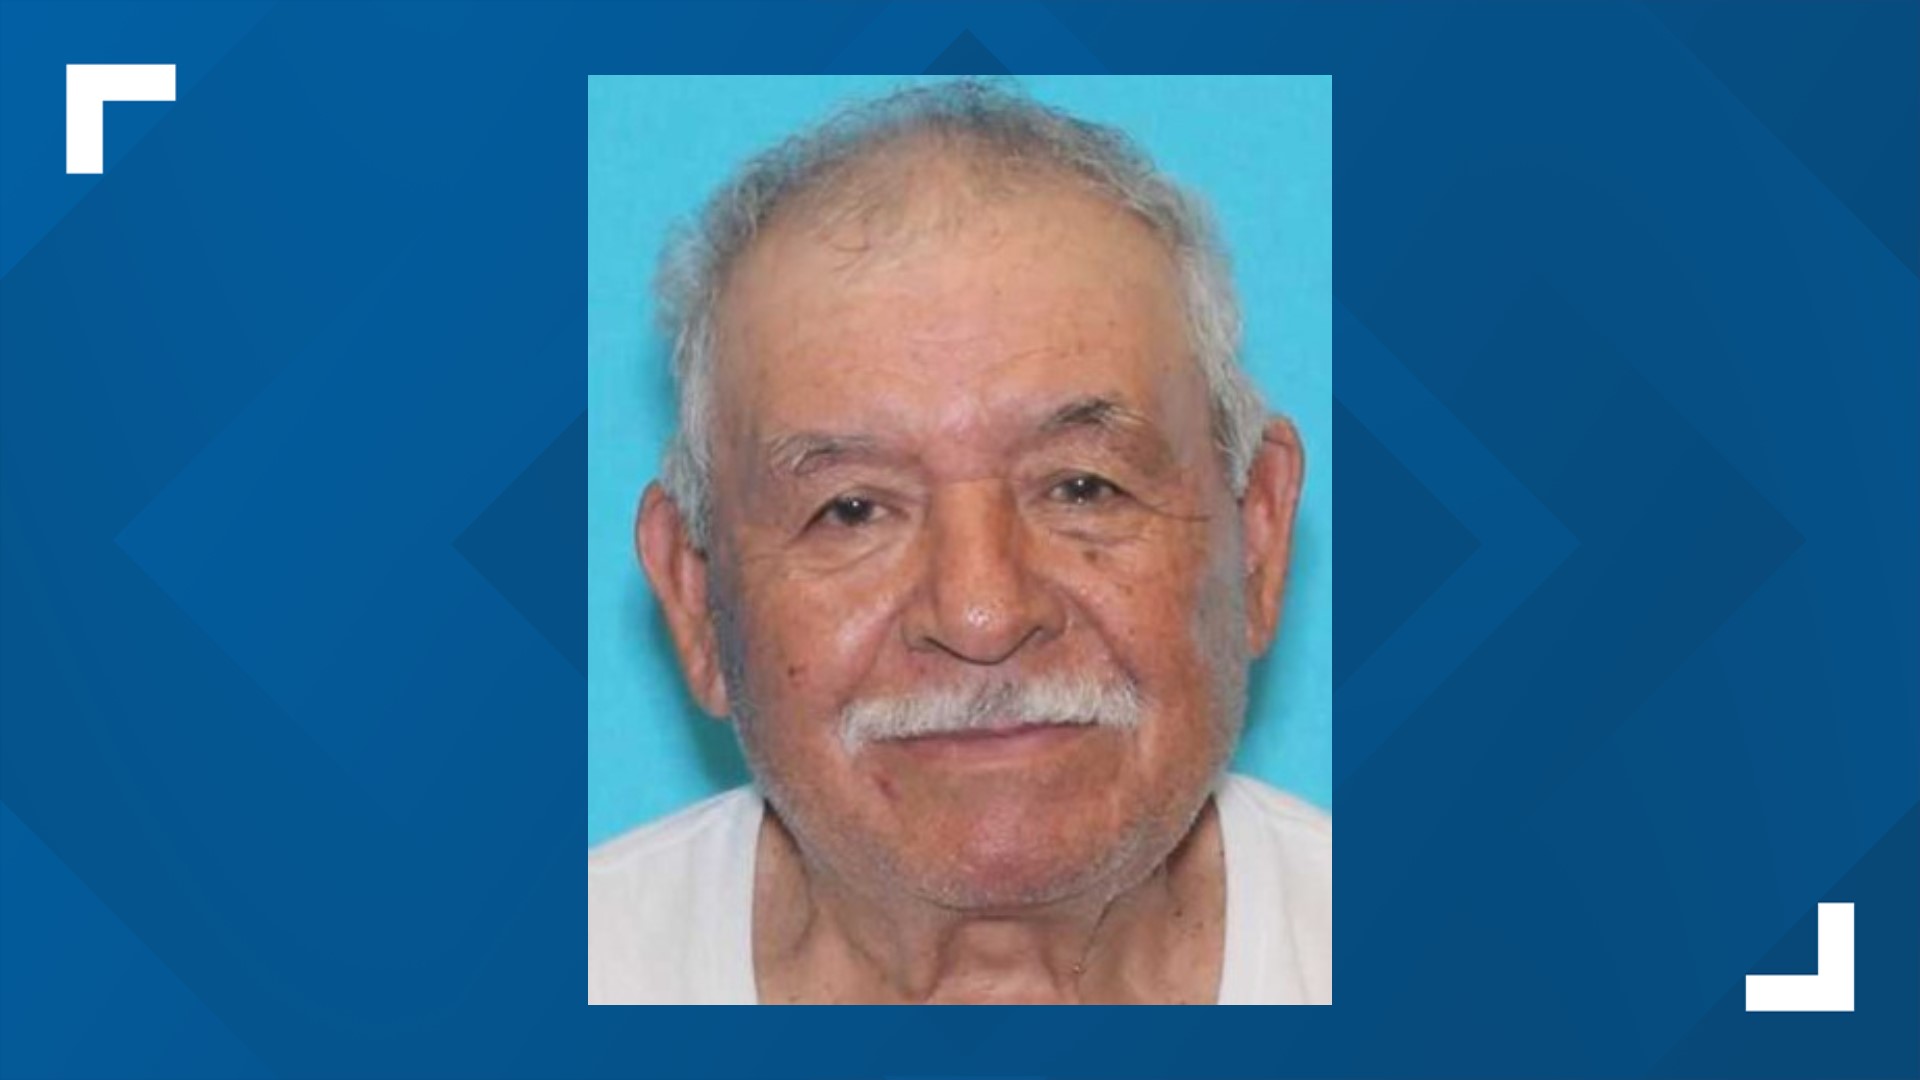 UPDATE: The body found in a field near Abernathy has been identified as missing Slaton man Celestino Rodriguez, according to Lubbock police.